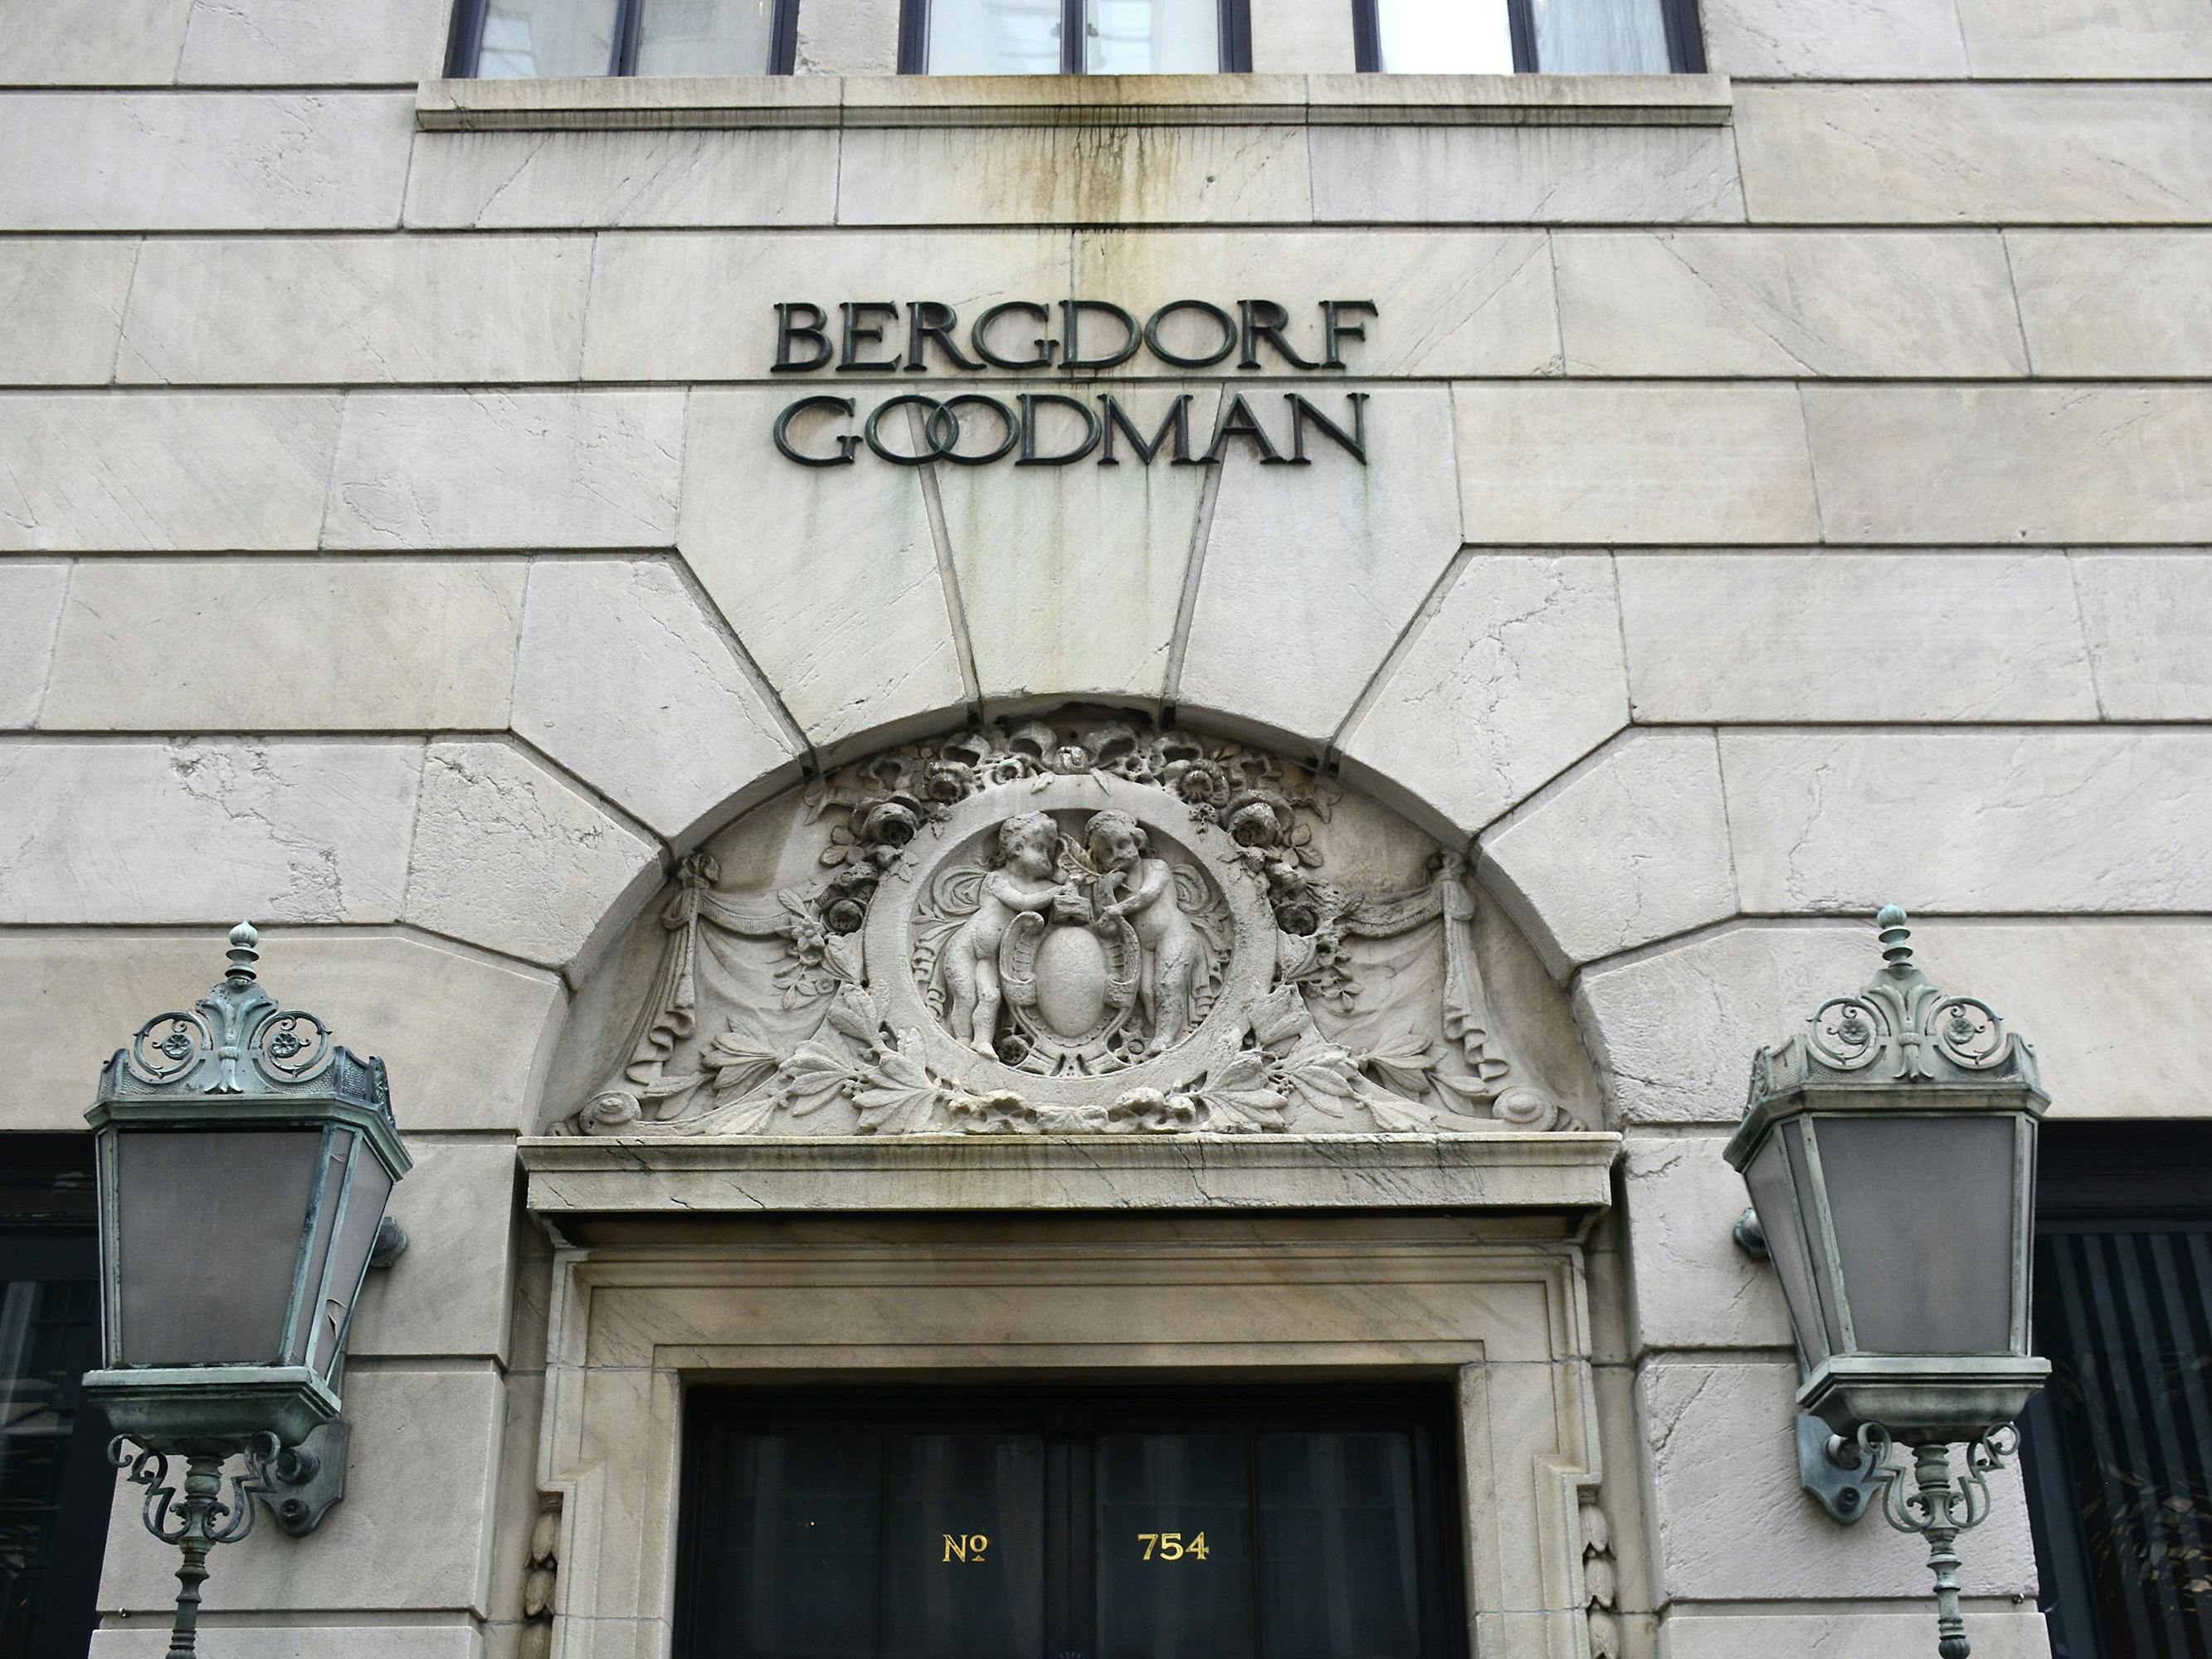 The outside of Bergdorf Goodman. The door is flanked by two large lanterns.